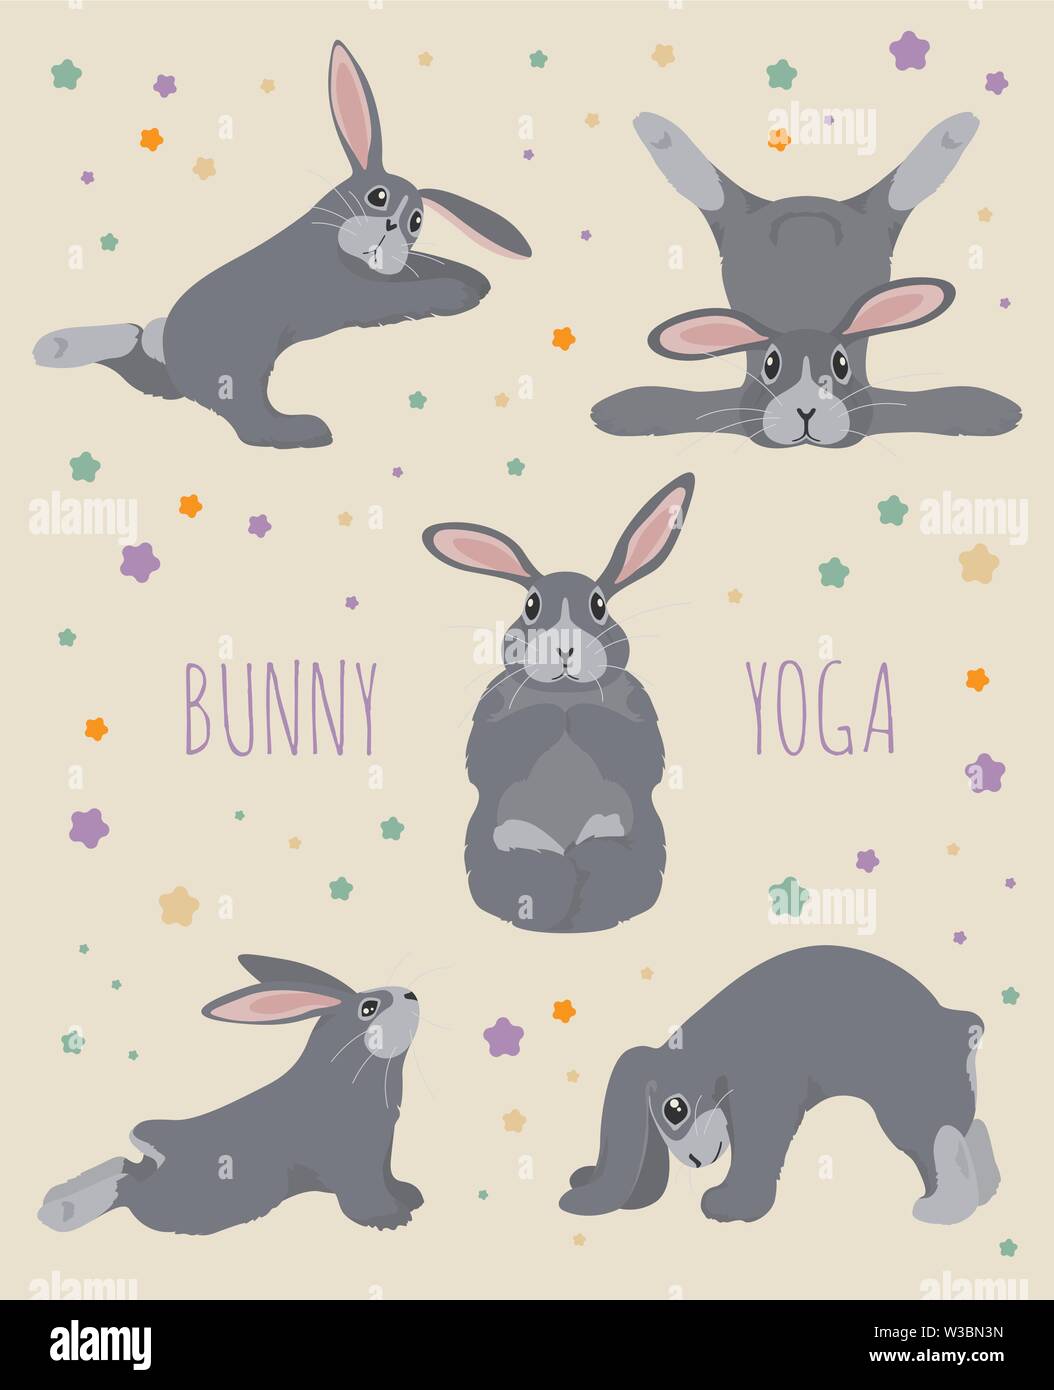 Gym bunny Stock Vector Images - Alamy